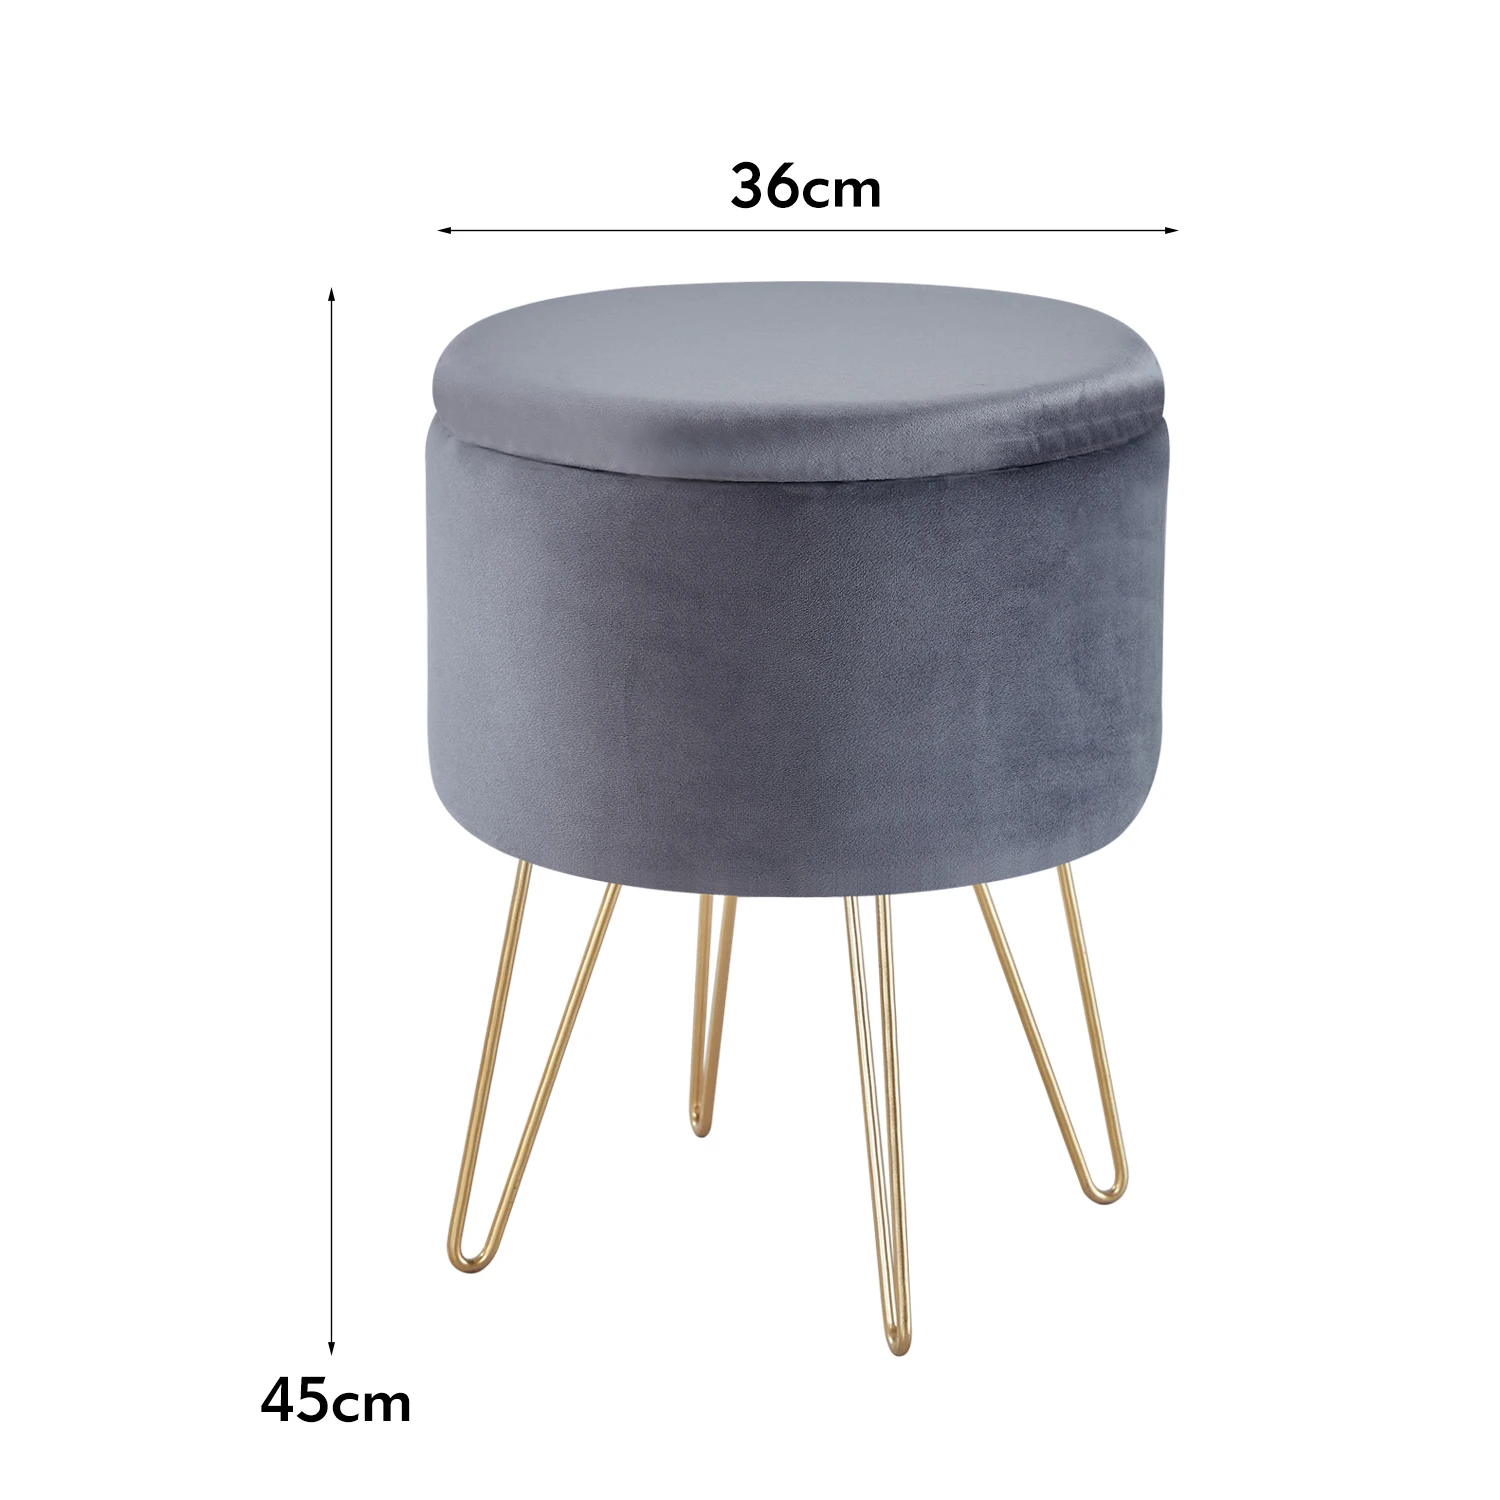 

Round Velvet Footrest Stool Ottoman Upholstered Vanity Chair Pouffe With Storage Function Seat Tray Top Coffee Table D Comfress